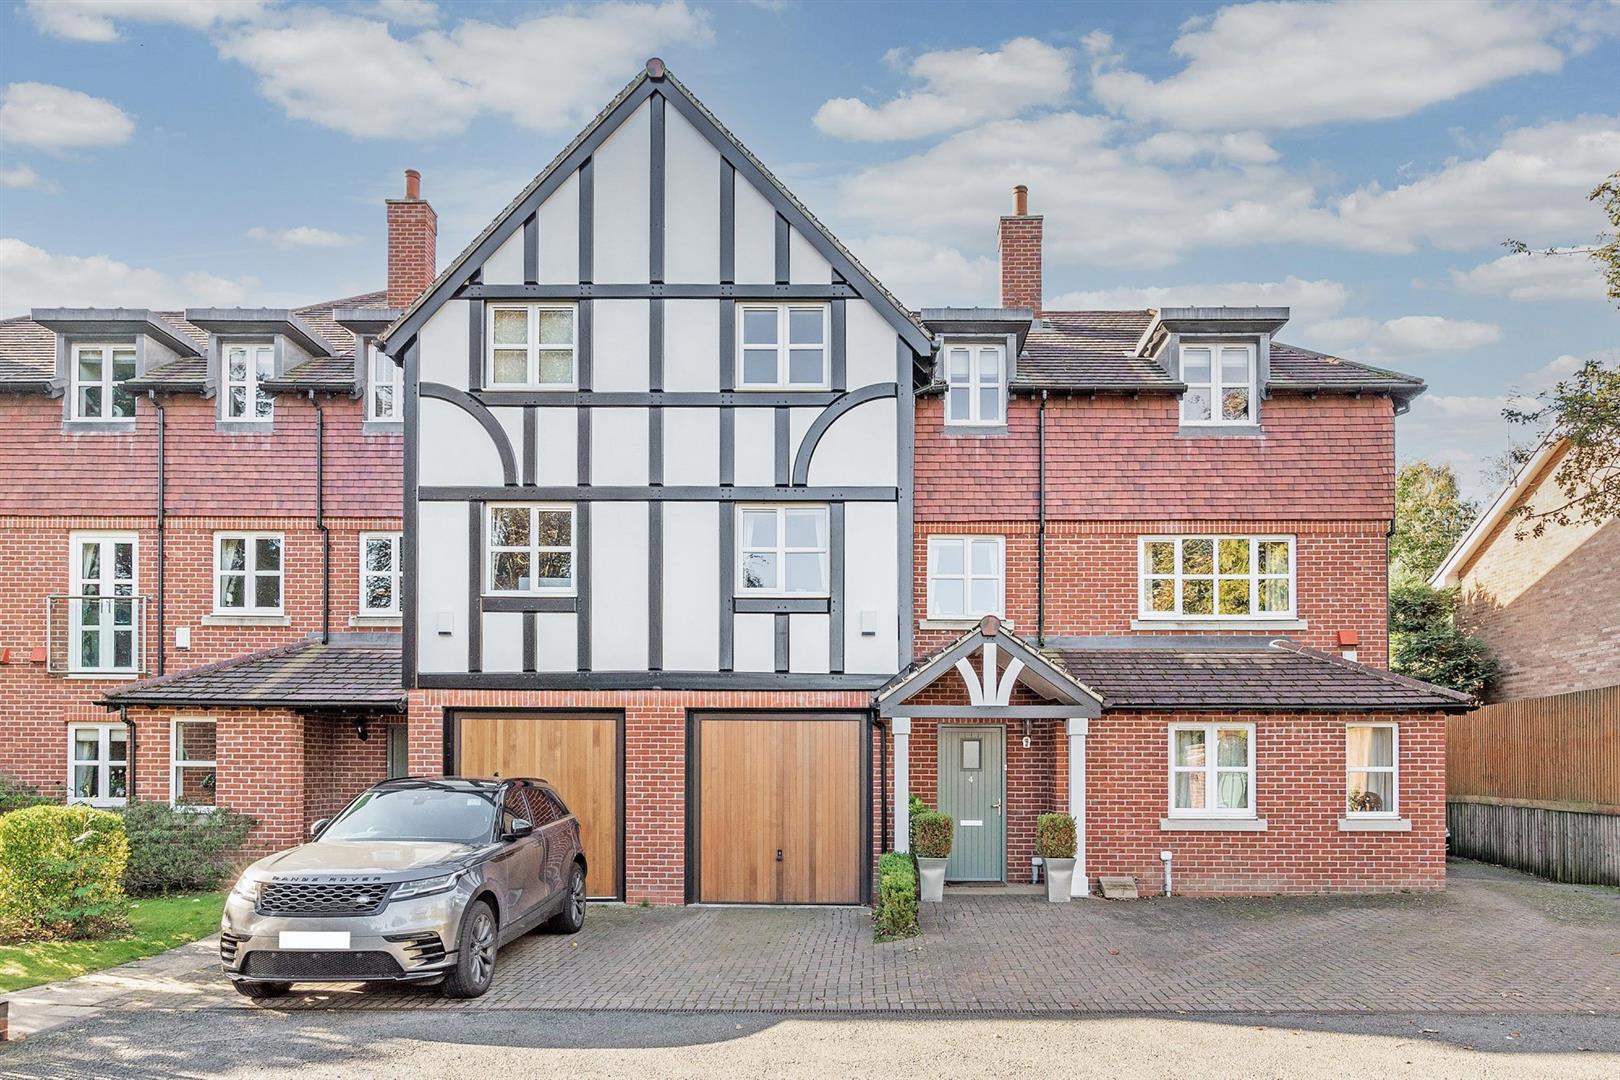 4 bed town house for sale in Mill Lane, Solihull 0